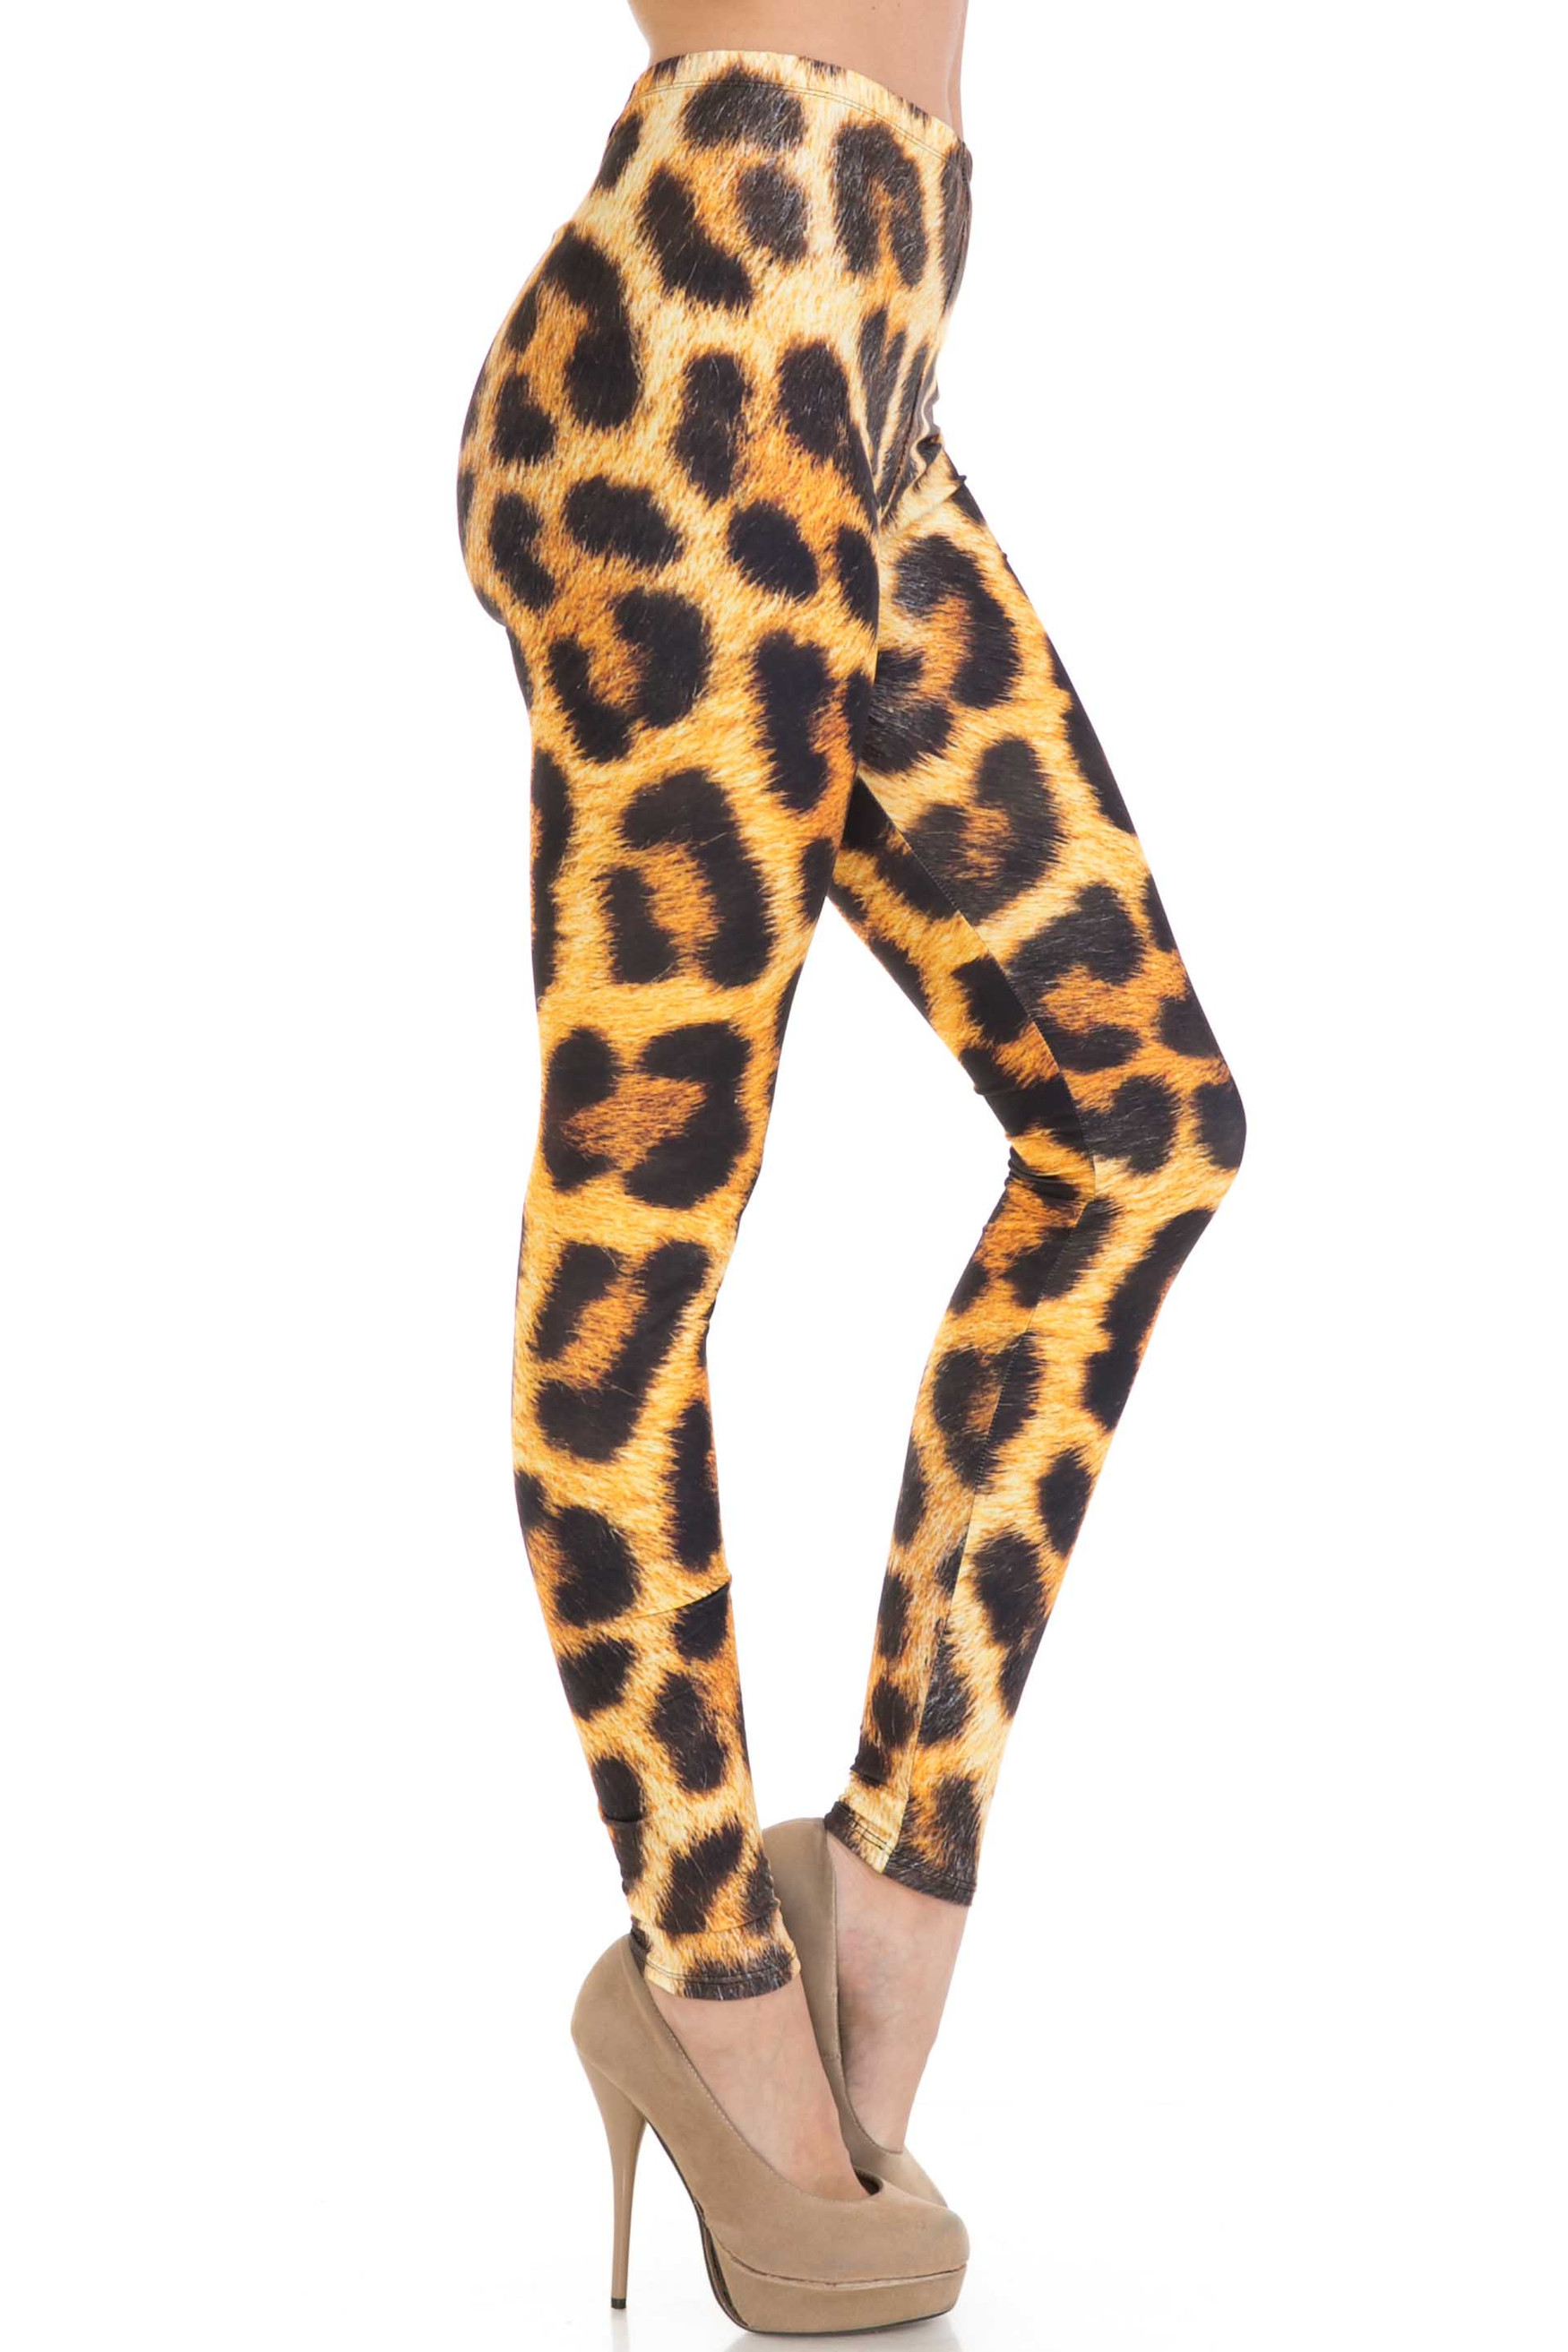 Creamy Soft Spotted Panther Plus Size Leggings - USA Fashion™